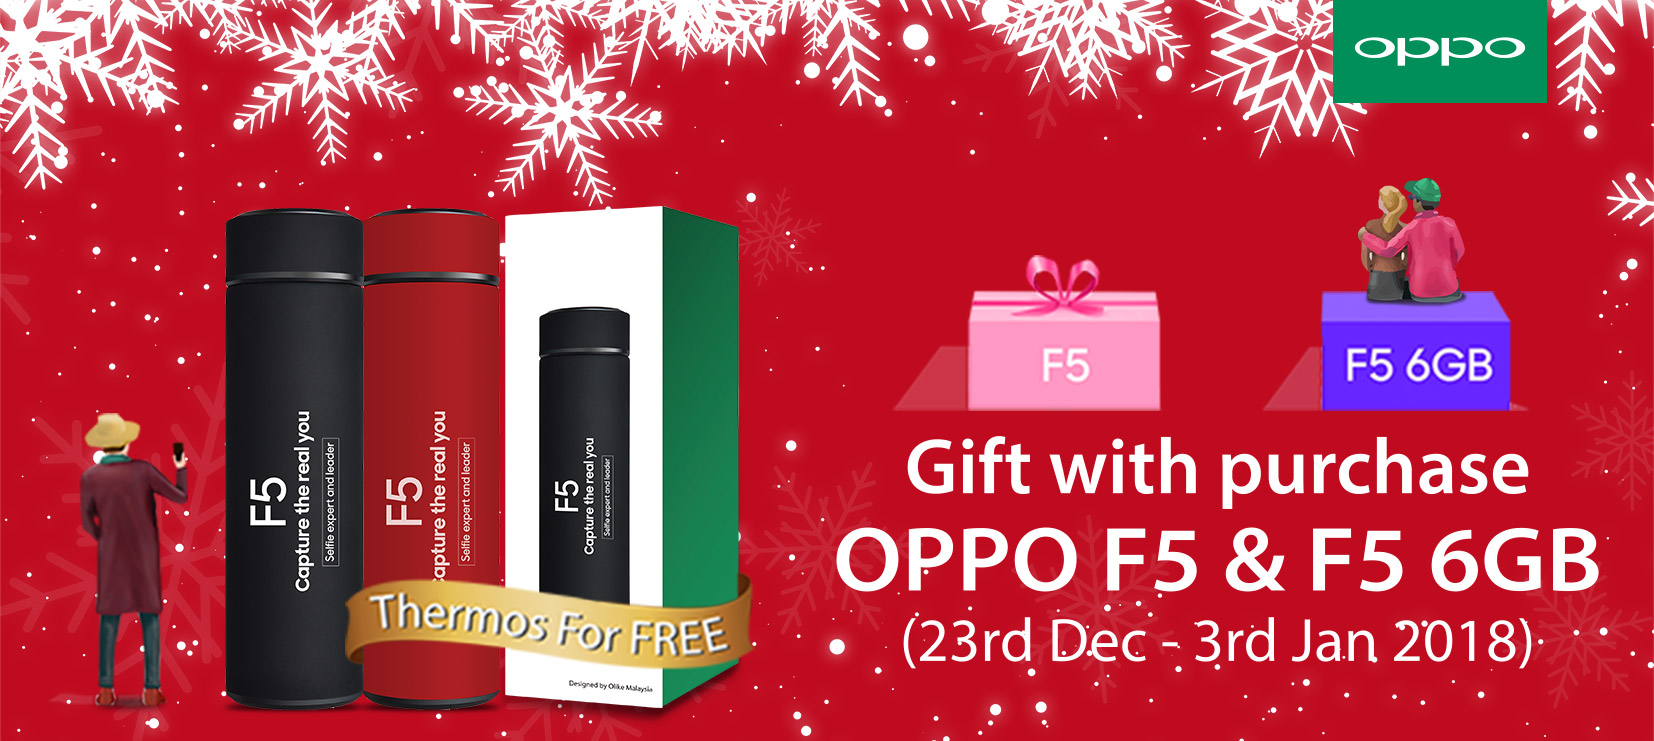 OPPO Malaysia offering a free thermos bottle for a month if you buy a F5 or F5 6GB smartphone